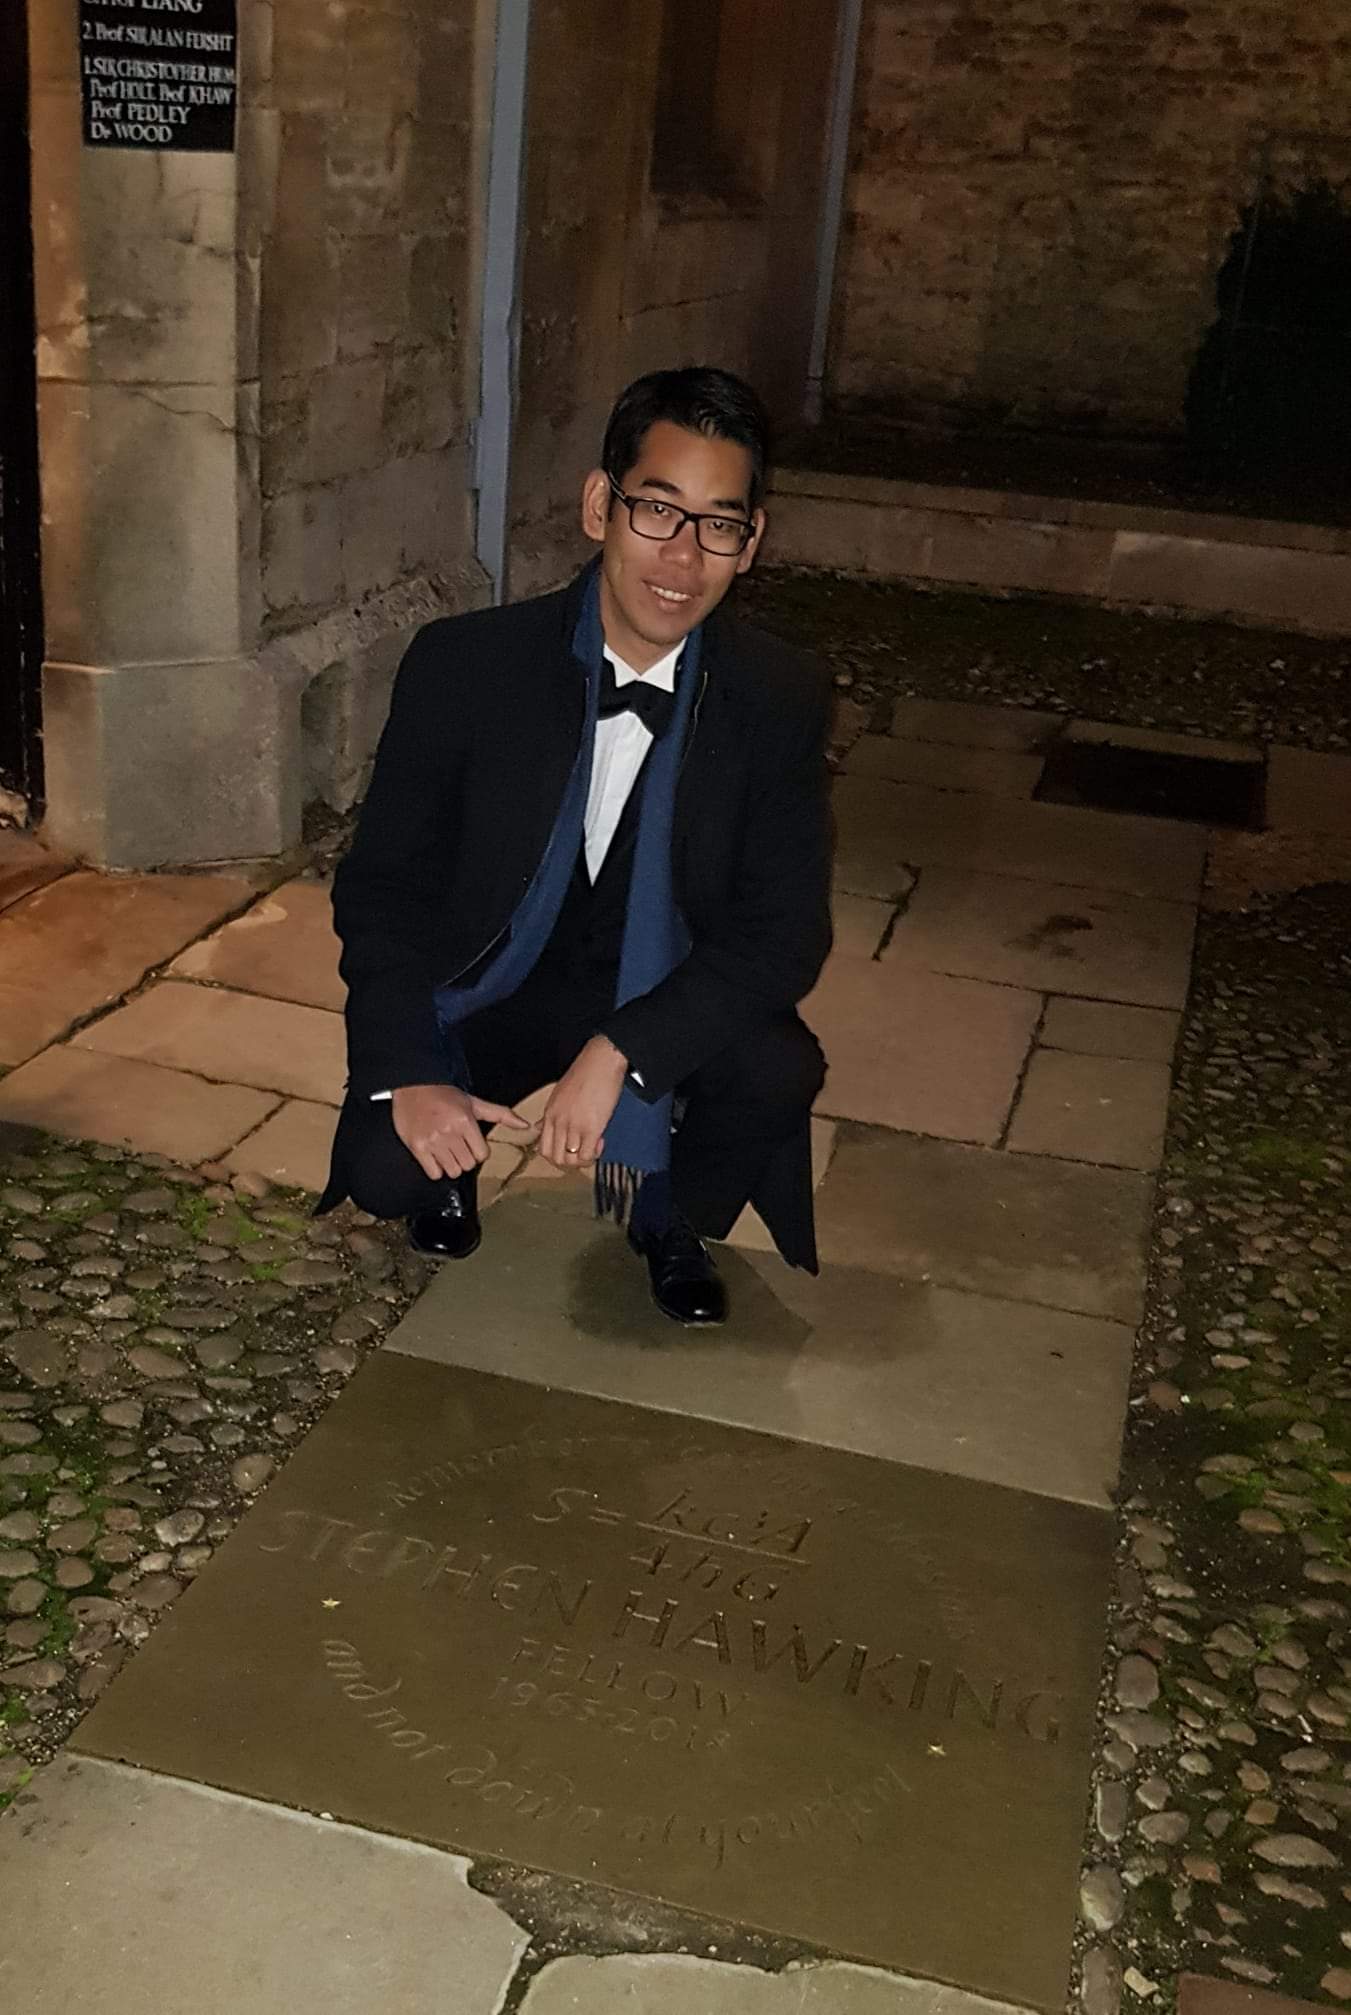 A man in a dinner jacket crouching next to a stone bearing the name of Professor Stephen Hawking